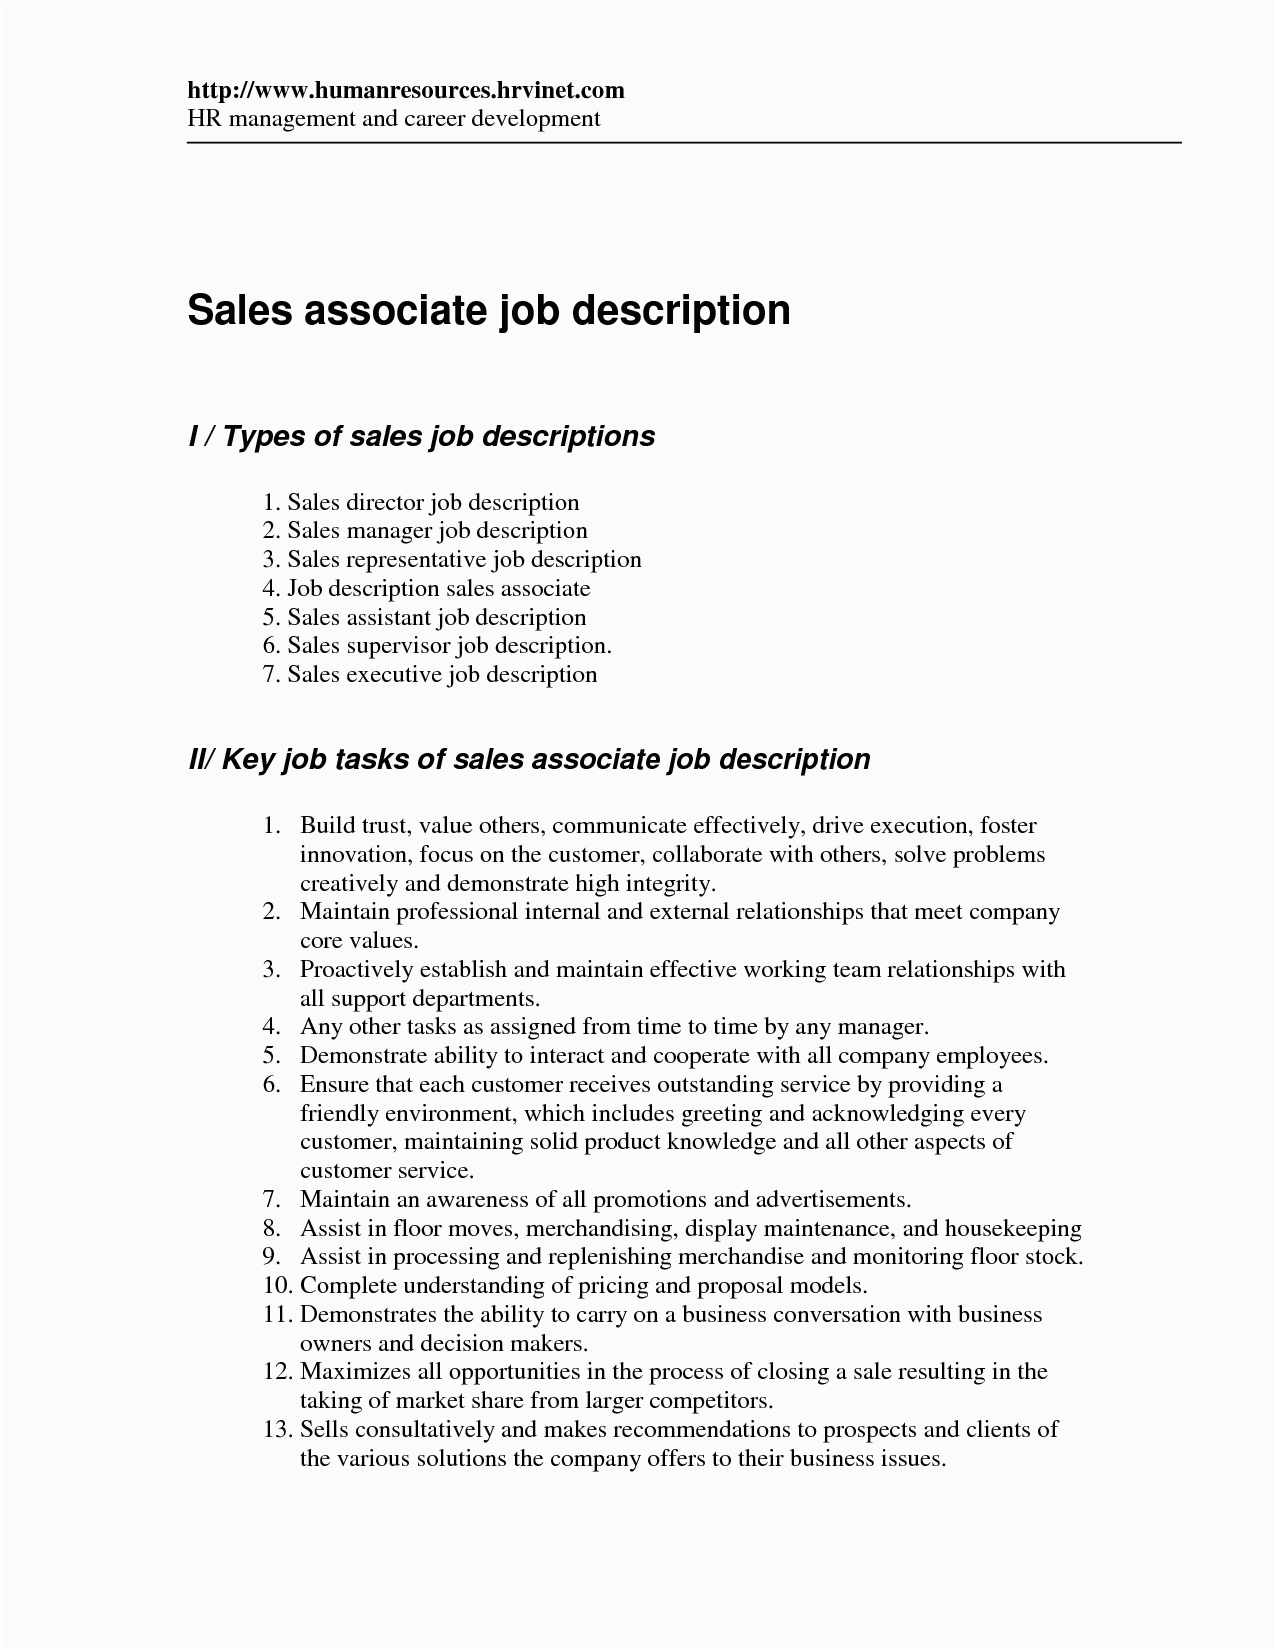 Sample Resume for Sales Lady Position Sample Resume for Sales Lady Position